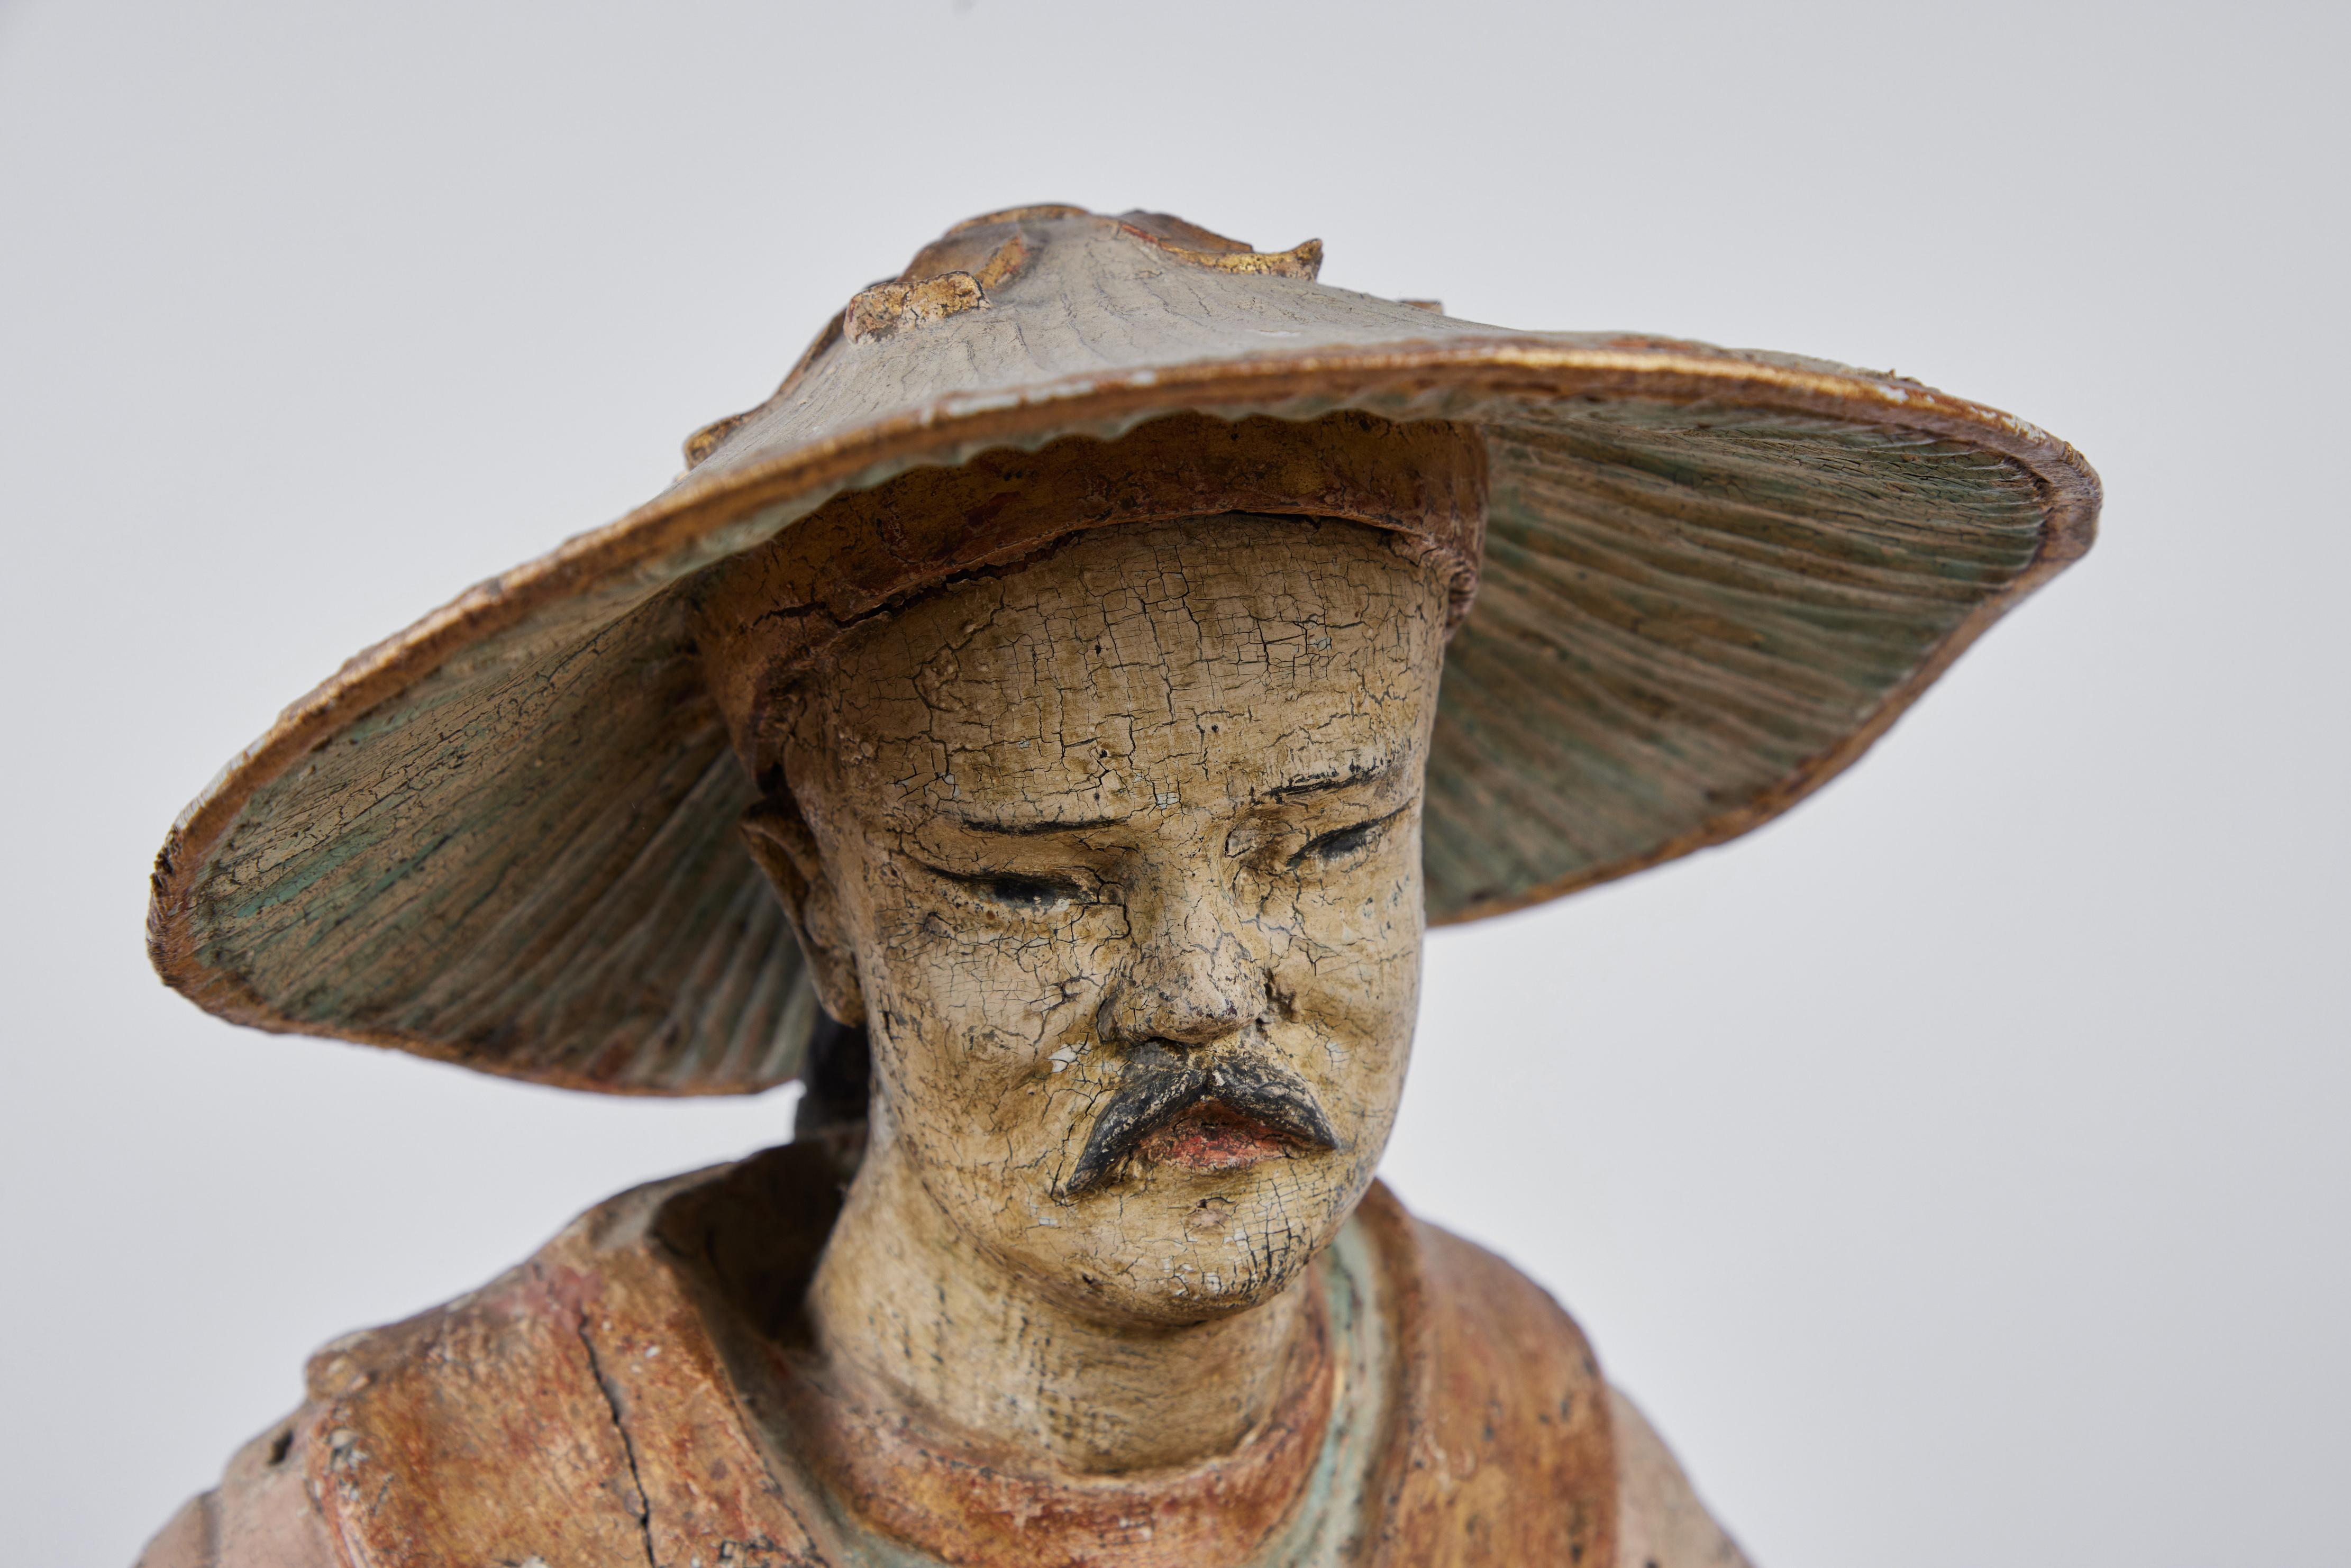 An elegant, turn-of-the-19th century, hand-carved, fully finished polychrome and parcel gilt statue of a Chinese wise man with a cascading braid beneath a a grand, bamboo hat capped by a foliate finial. He grasps both a scroll and a plumed fan. The